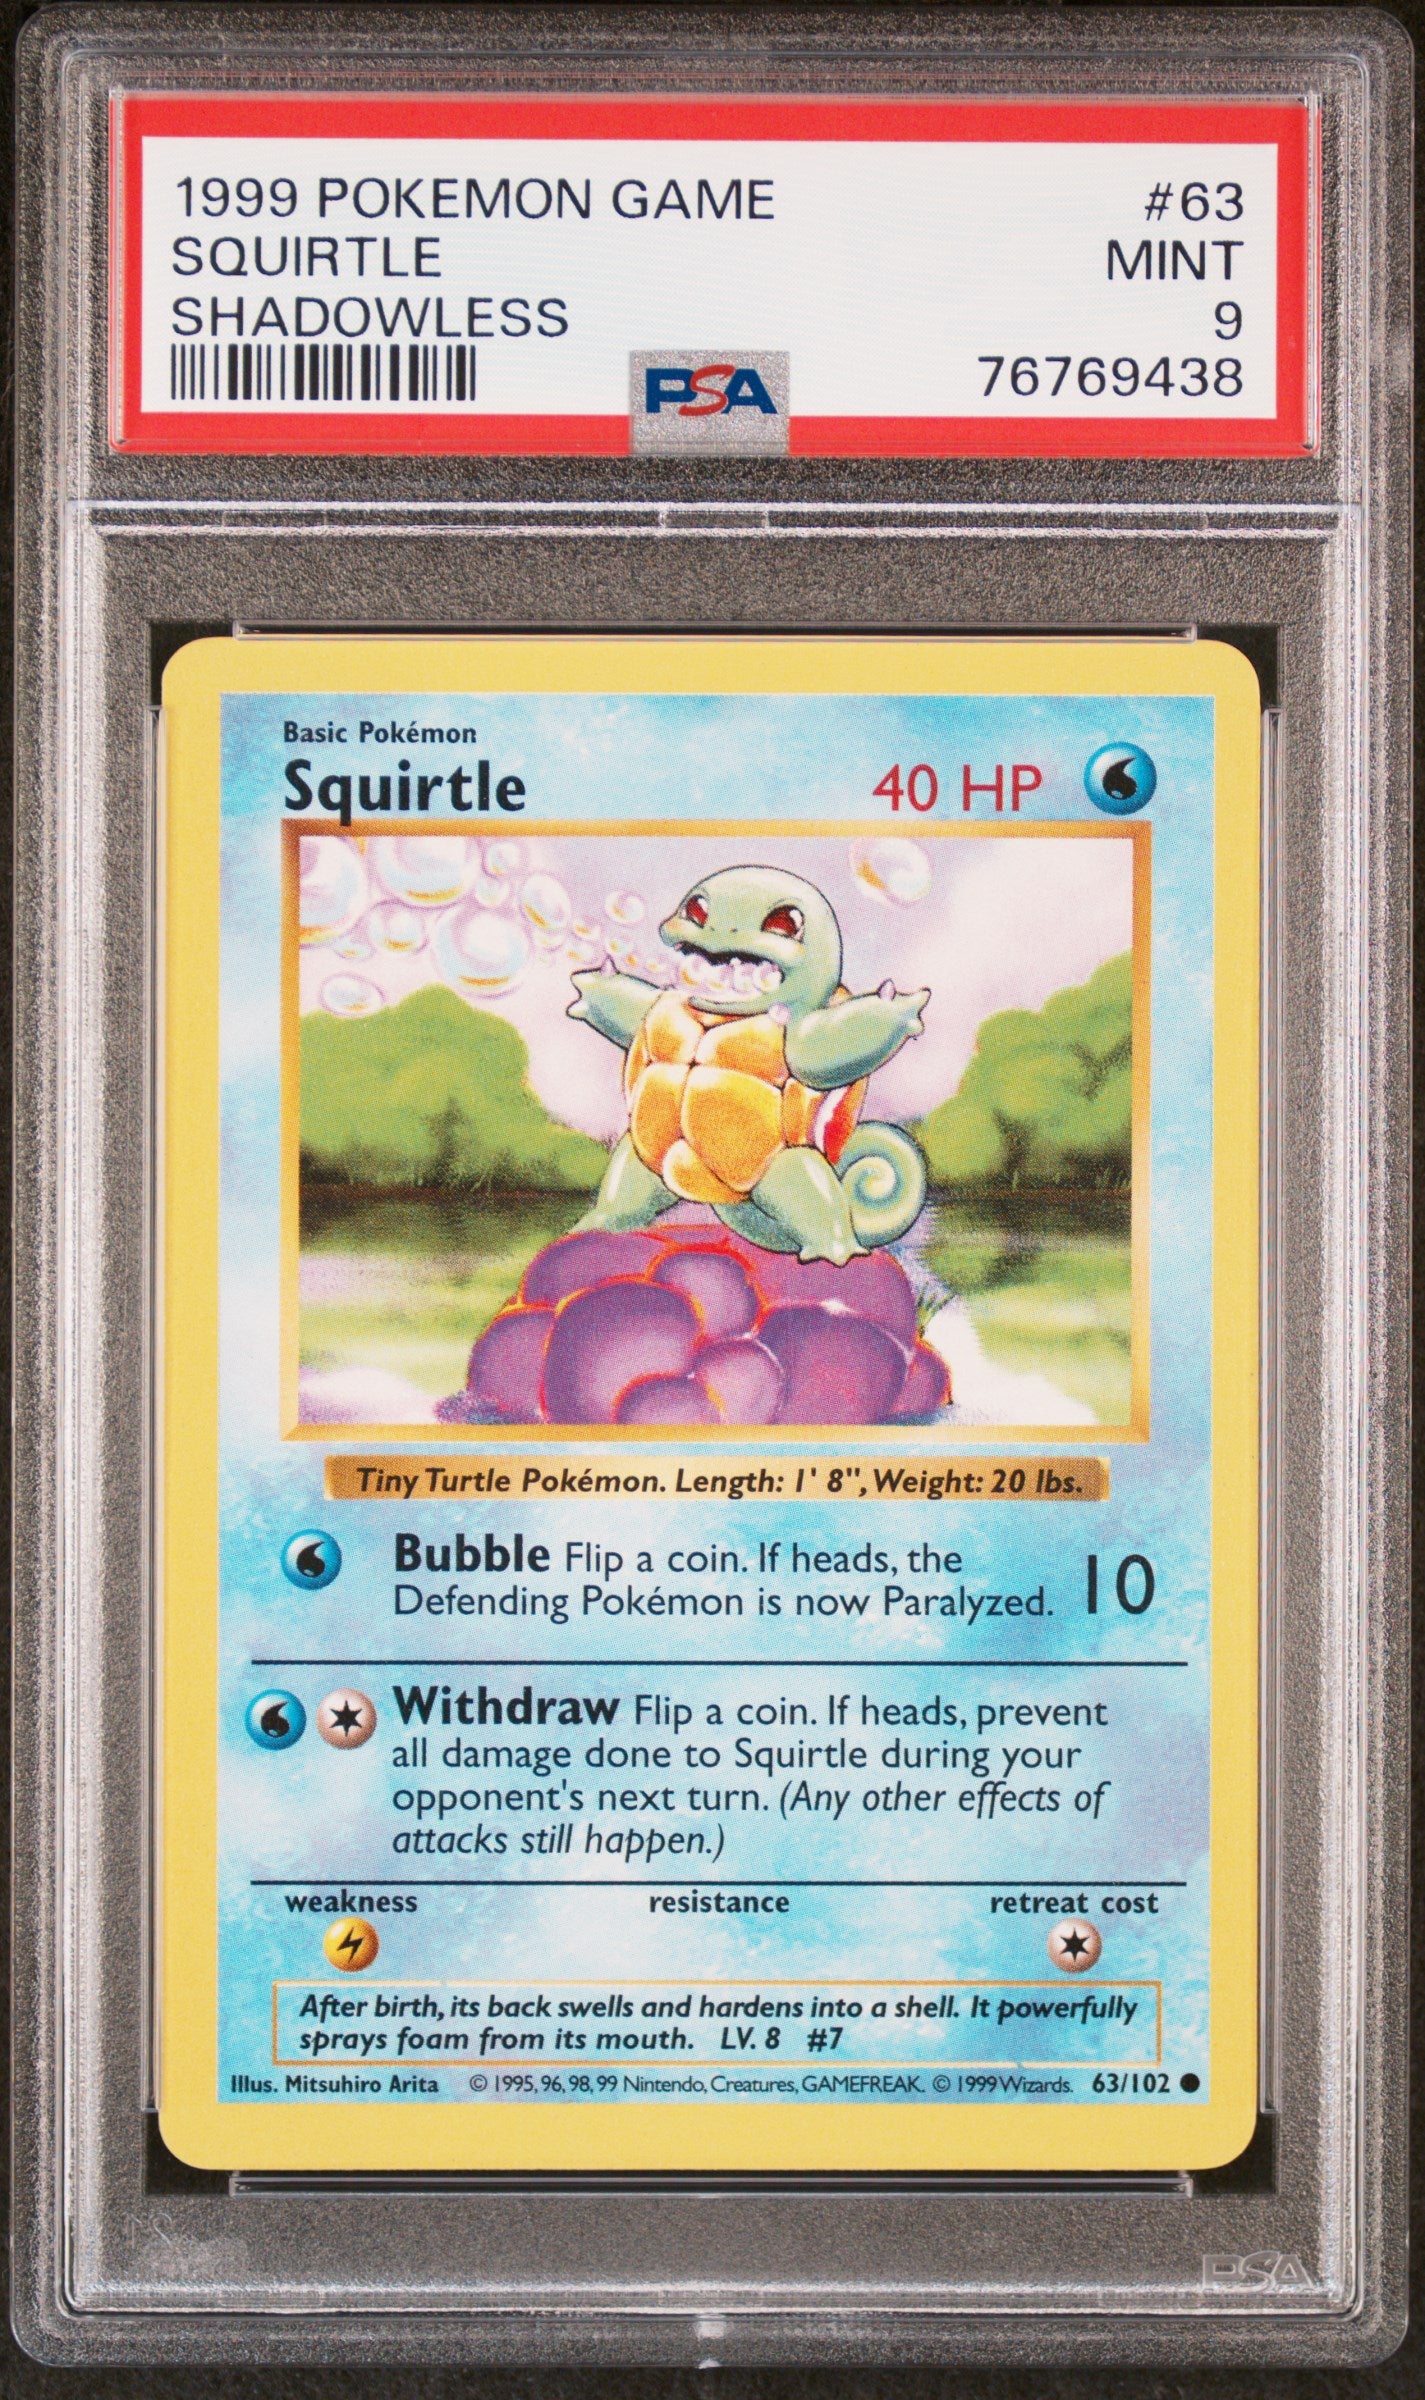 PSA 9 Squirtle Shadowless (Graded Card)